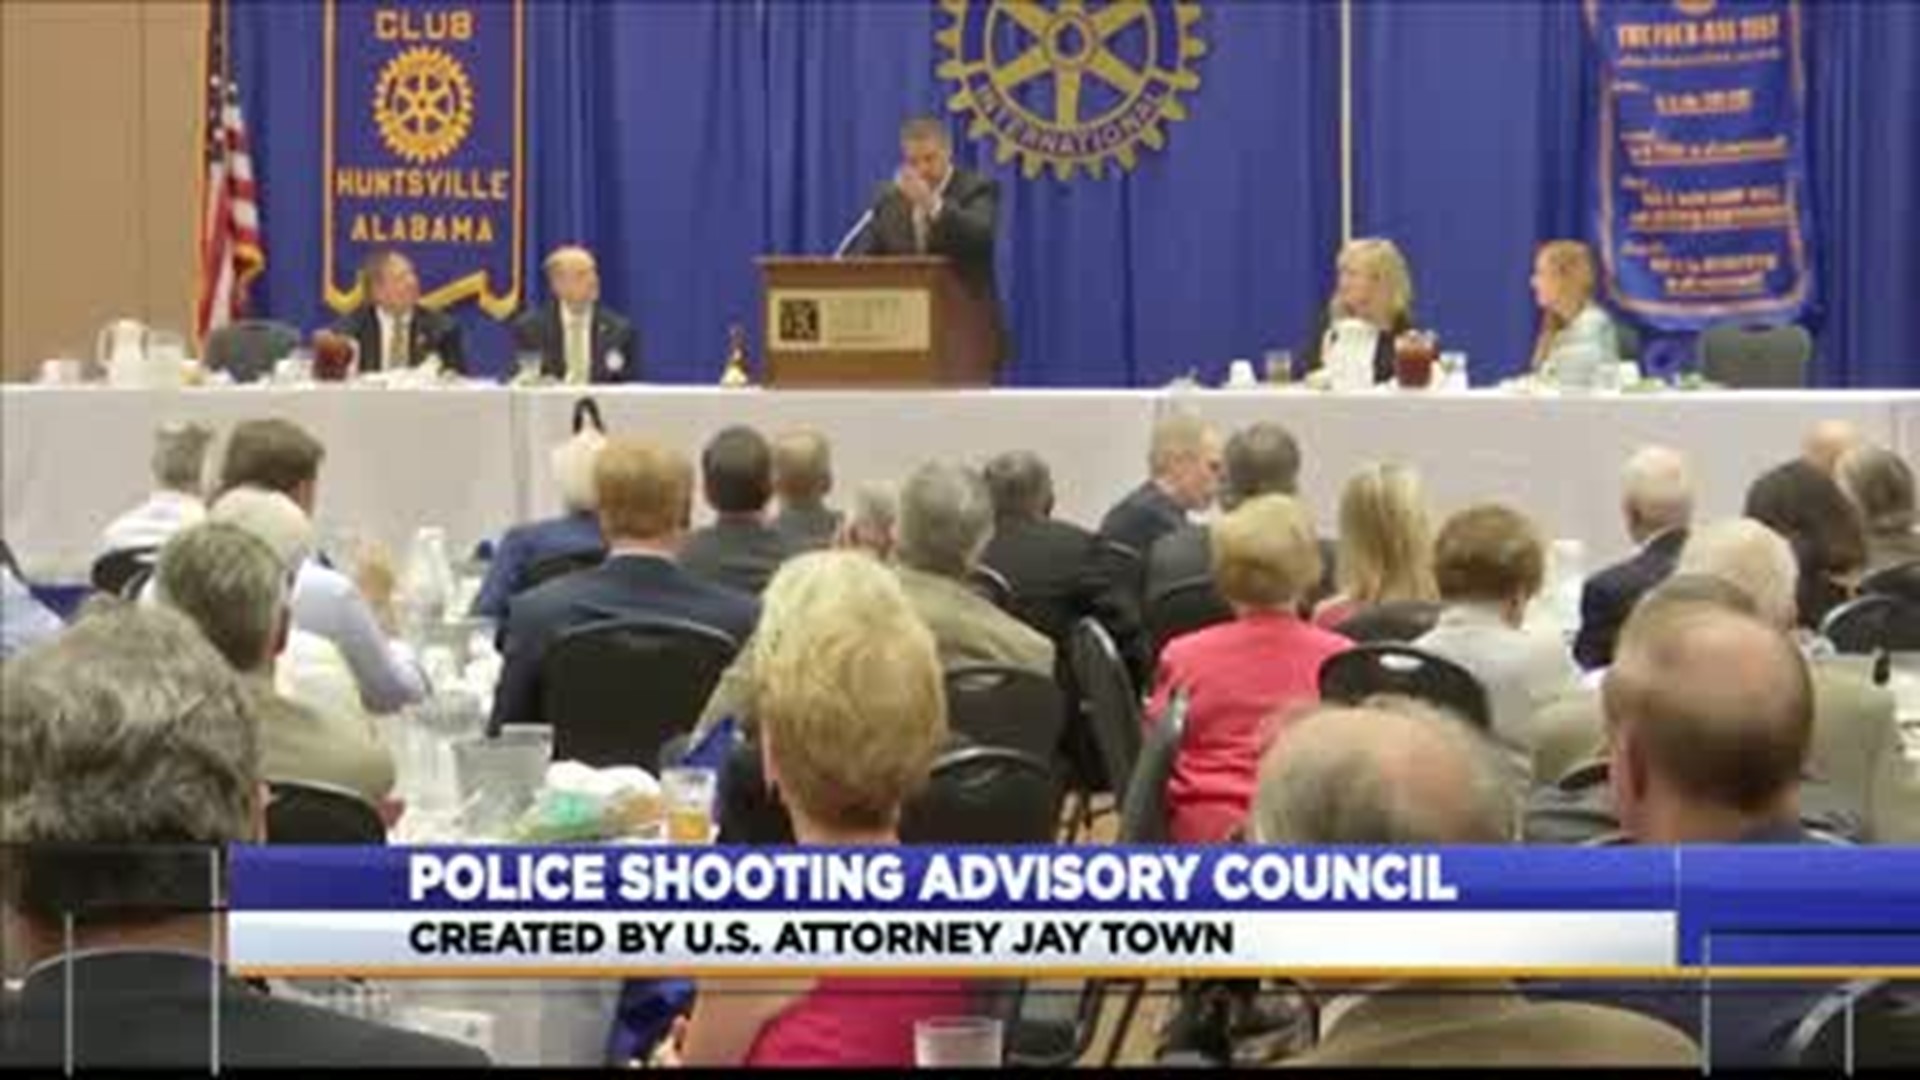 One of Alabama's US Attorneys is creating a "Police Shooting Advisory Council." US Attorney for the northern district of Alabama, Jay Town, announced the formation of an independent shooting review advisory council.